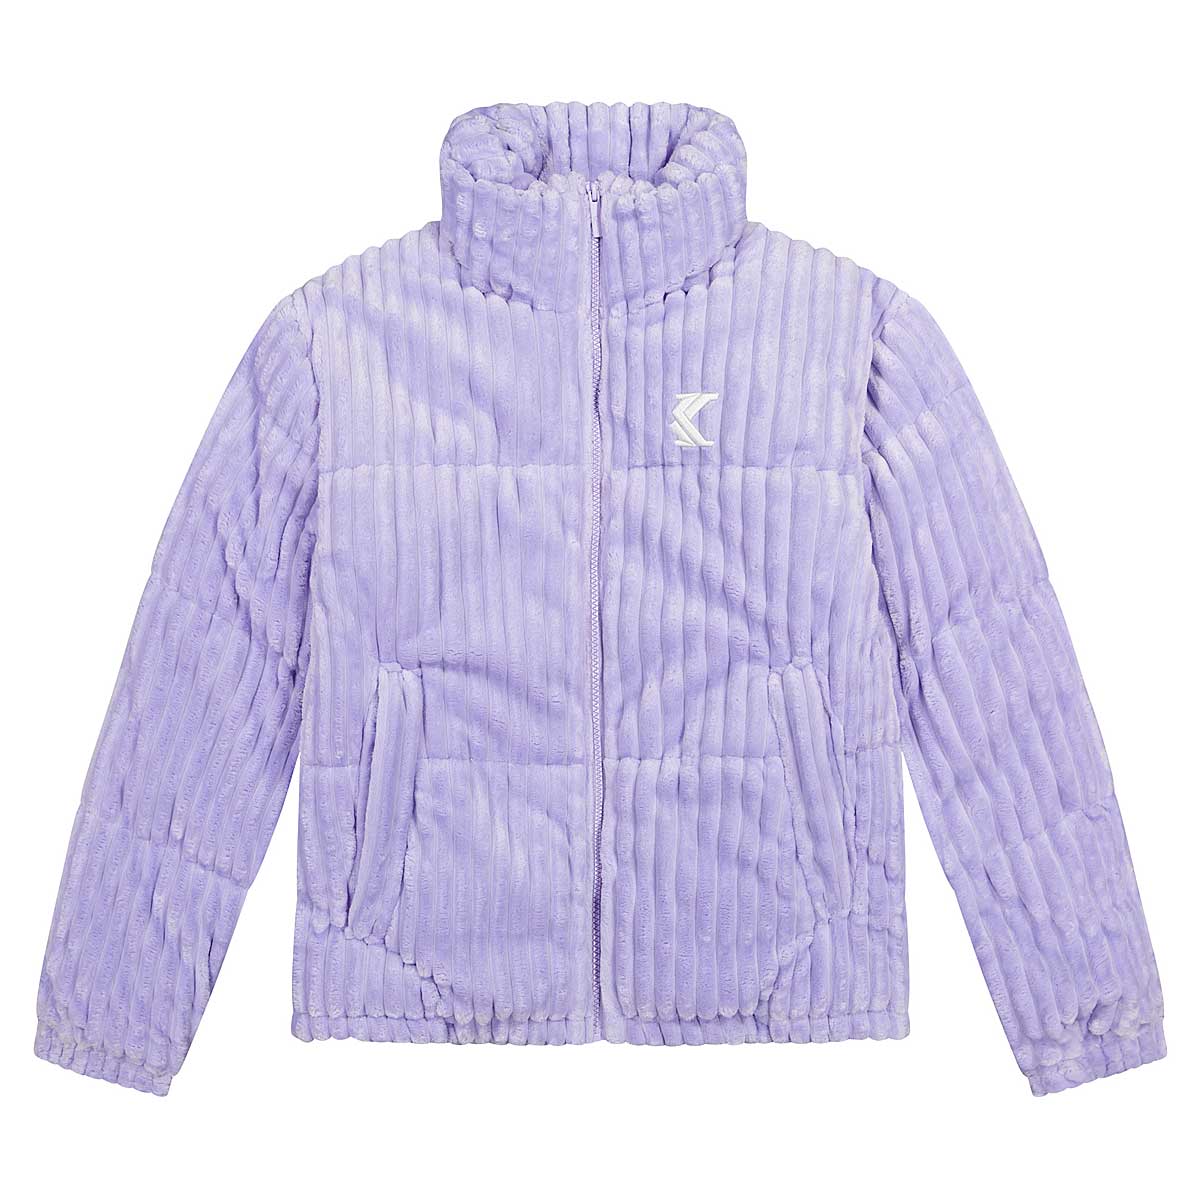 on WOMENS OG Fuzzy Corduroy Jacket Buy for Puffer N/A 0.0